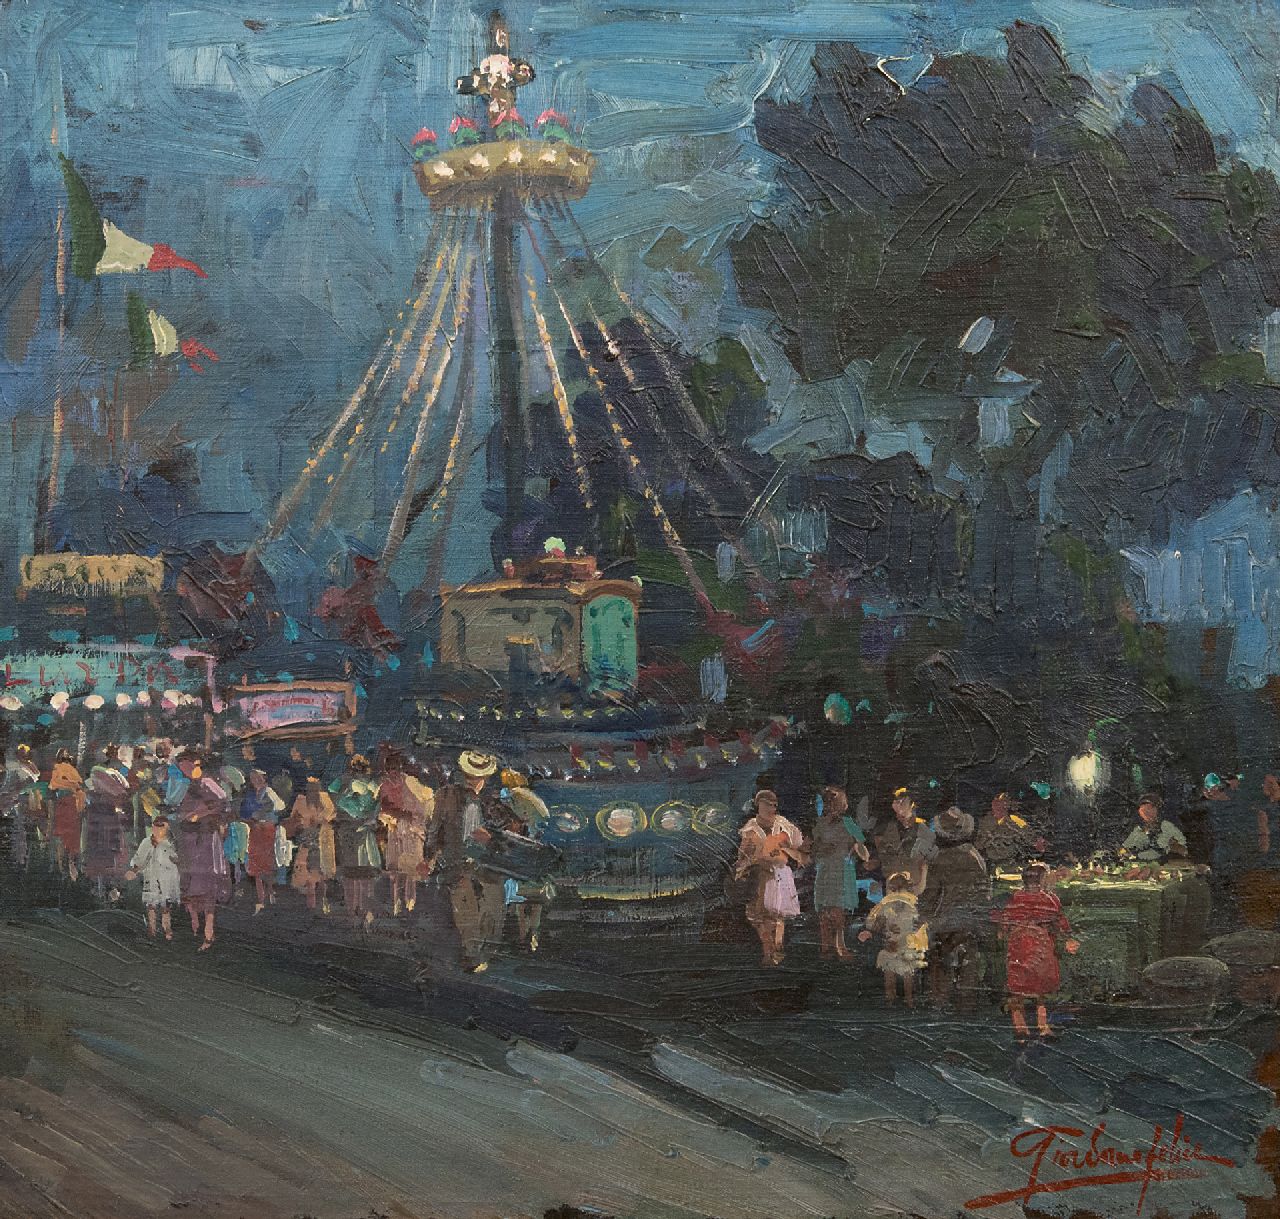 Giordano F.  | Felice Giordano | Paintings offered for sale | The merry-go-round by night, oil on canvas laid down on board 47.8 x 50.8 cm, signed l.r.